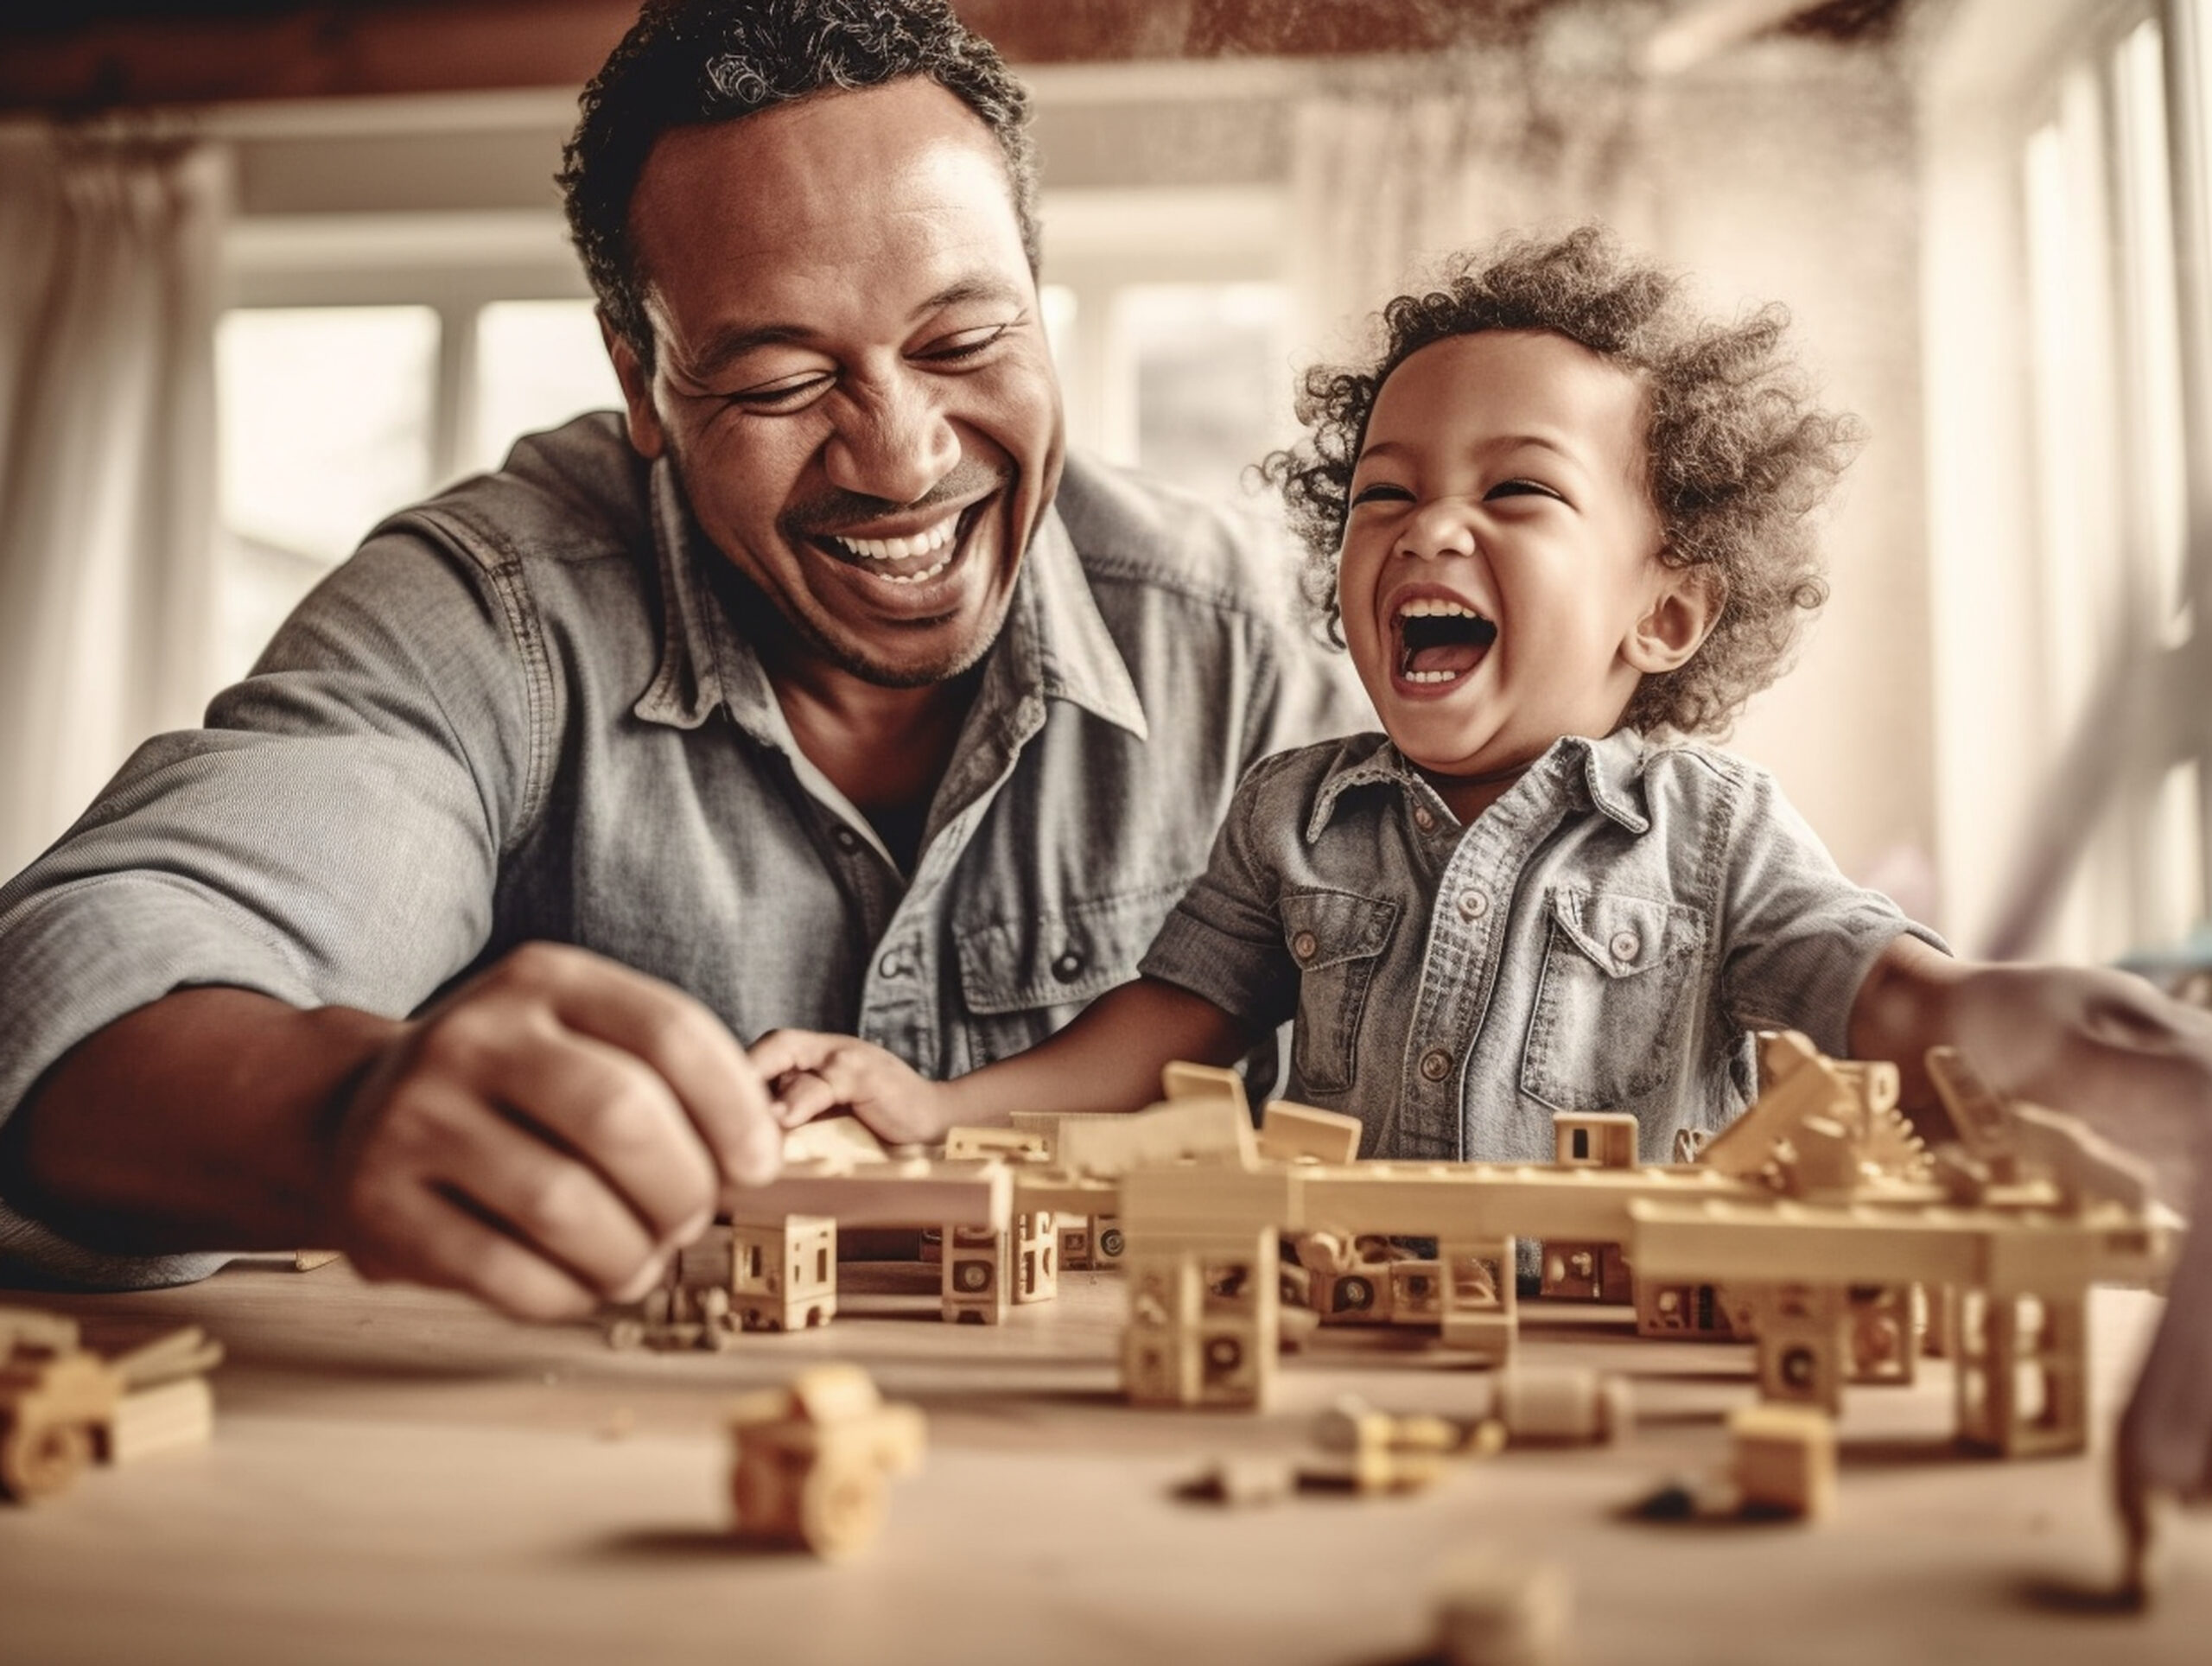 A joyful father and child laughing together while playing with wooden blocks and toy buildings on a table.